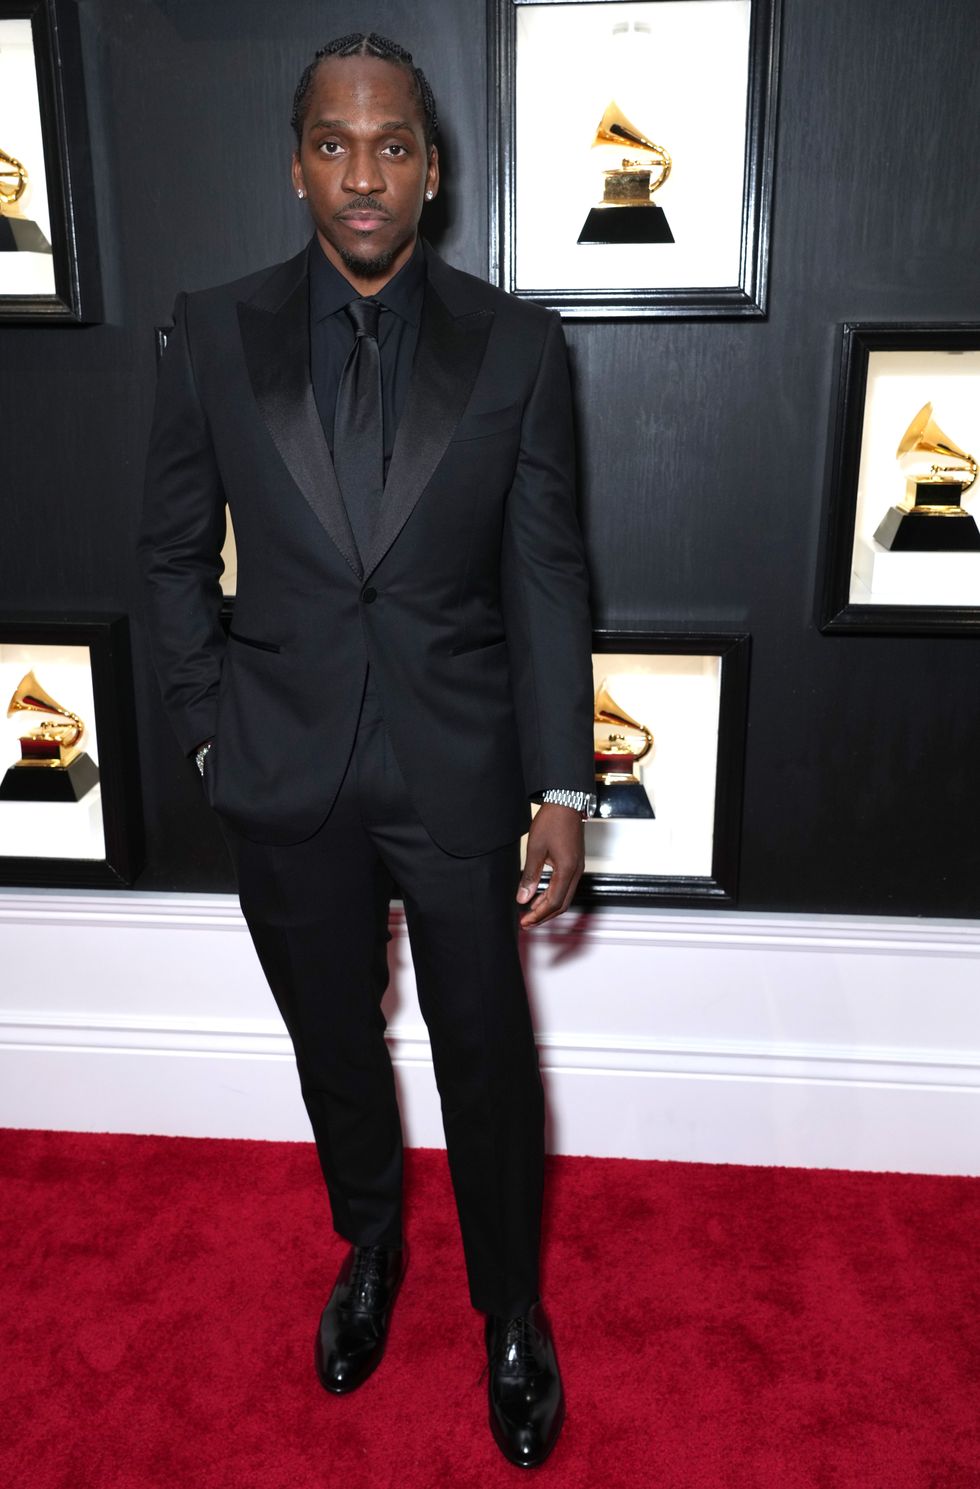 Grammys 2023: The Best-Dressed Men on the Red Carpet